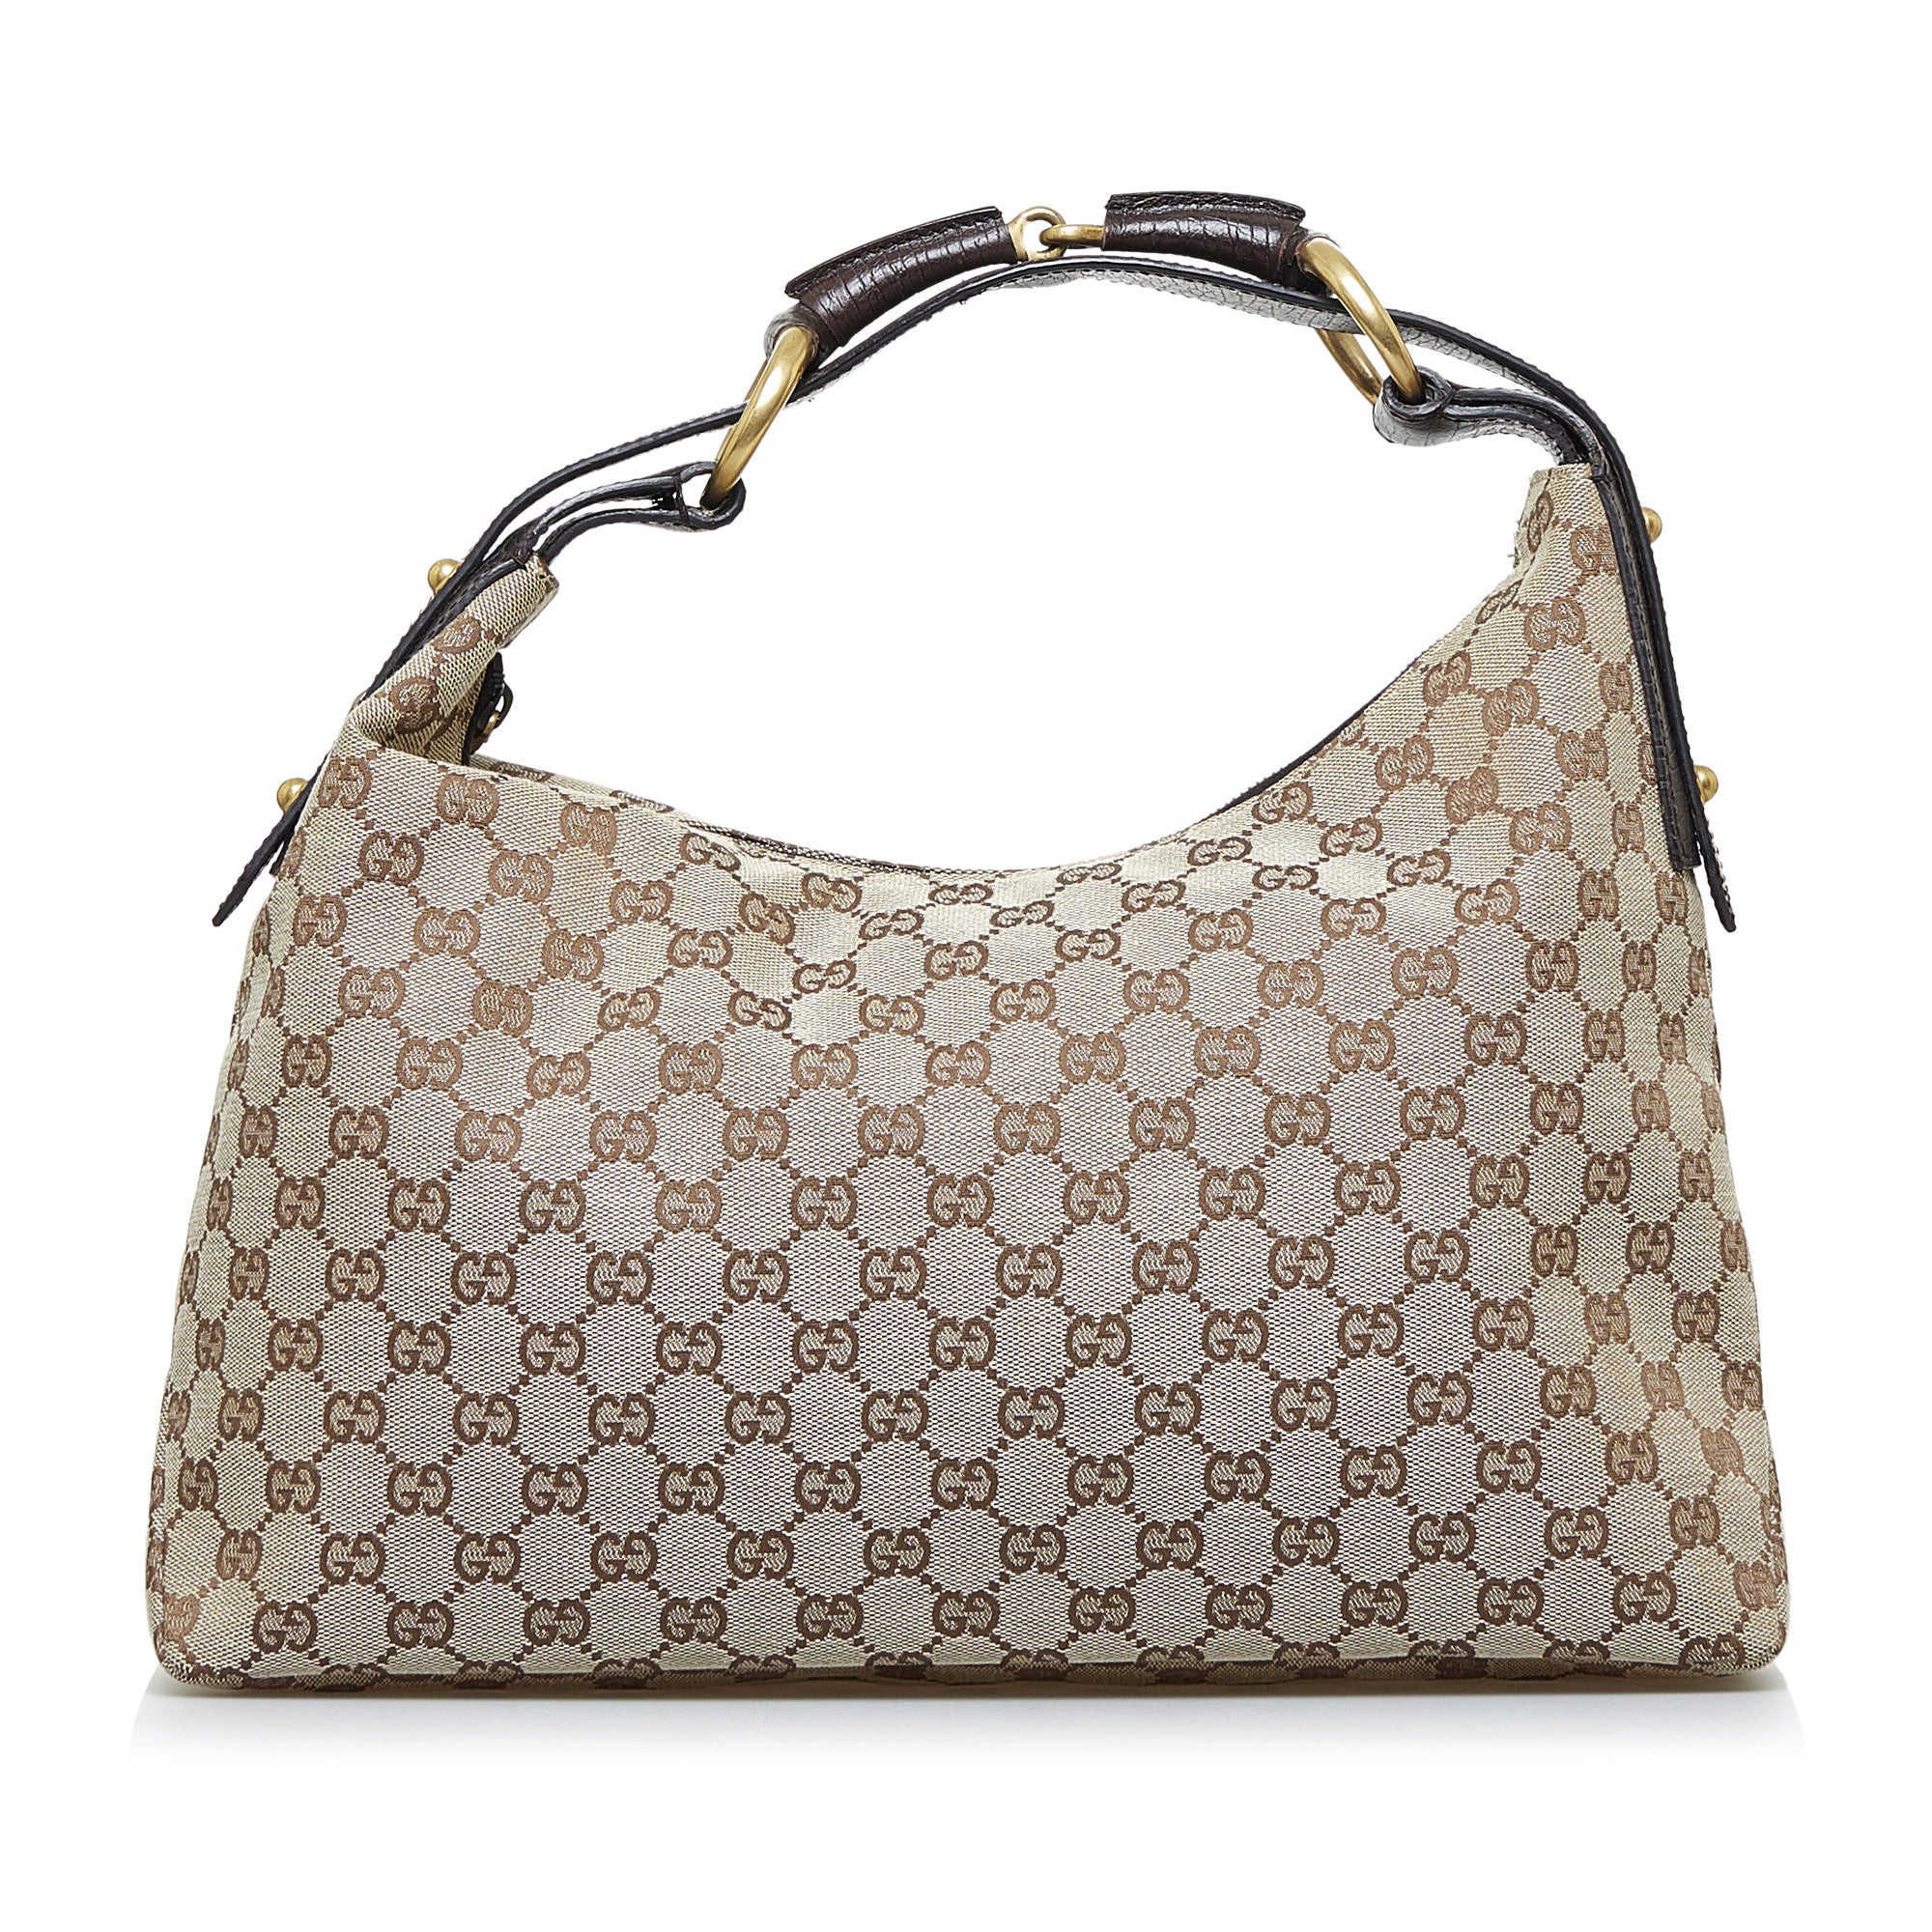 Authentic Gucci Beige Guccissima Leather Babouska Heart Tote Bag